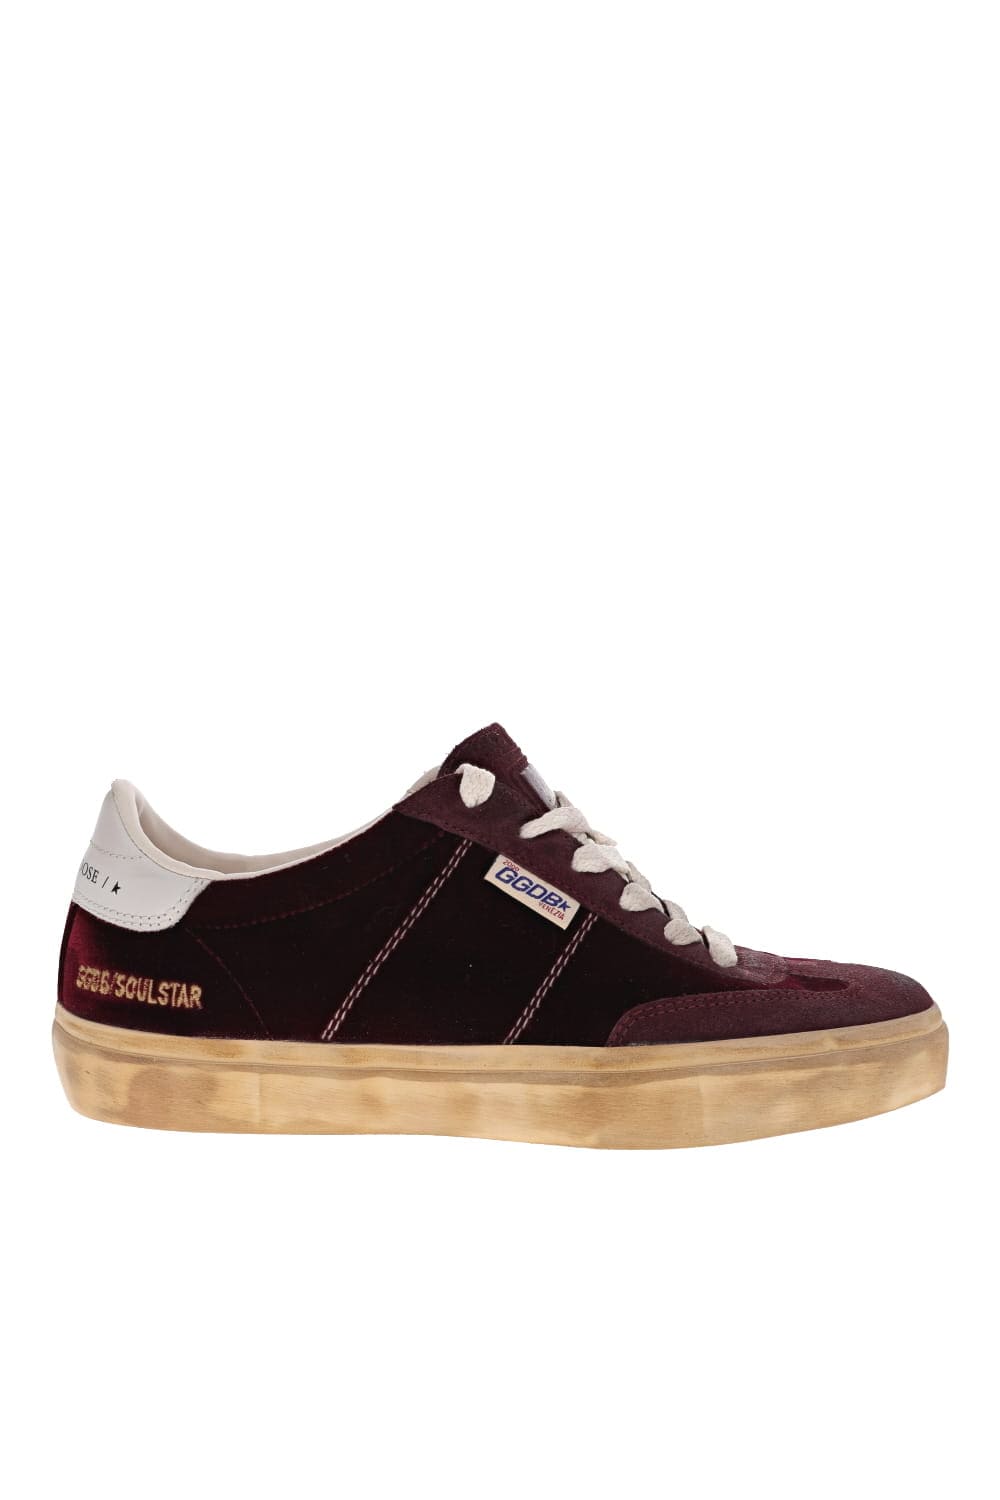 Soul Star Bordeaux Suede Leather Sneakers